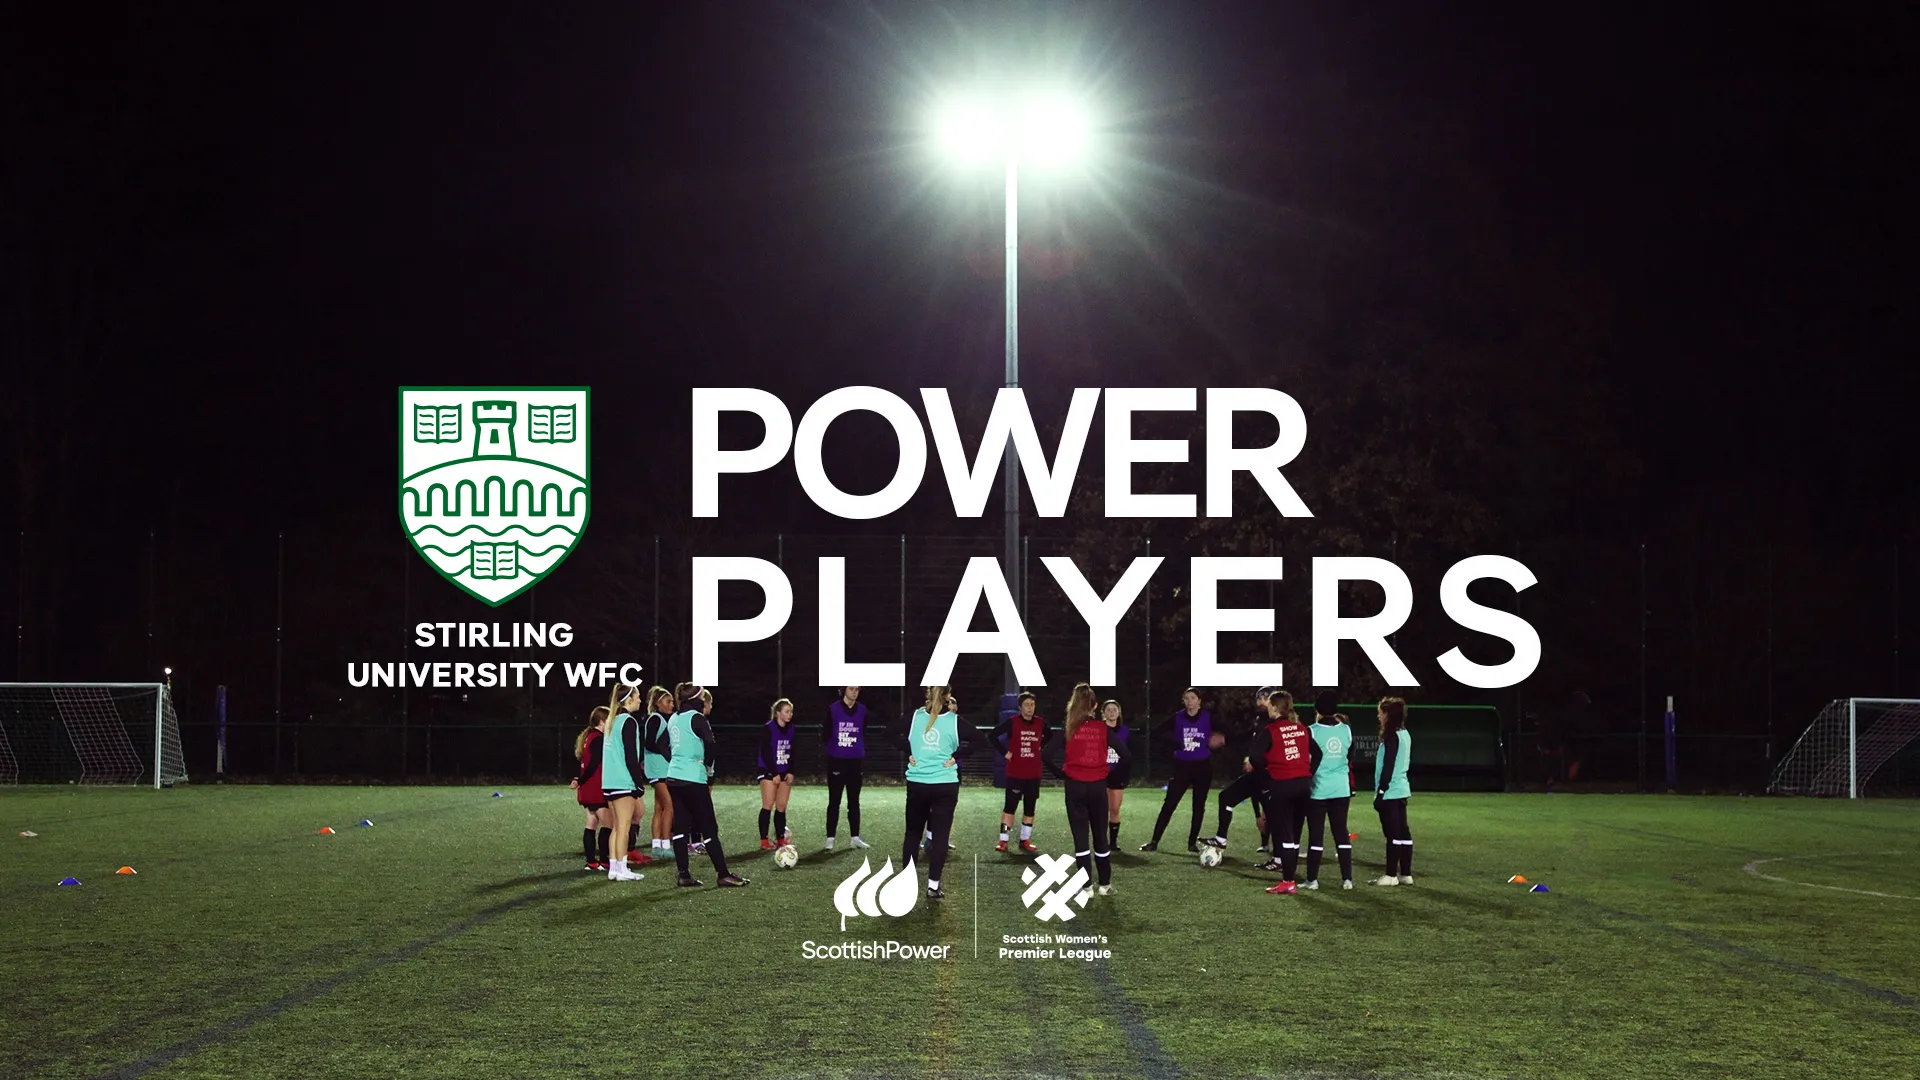 Image for Power Players | Episode 4 | Stirling University | Brought to you by ScottishPower & the SWPL